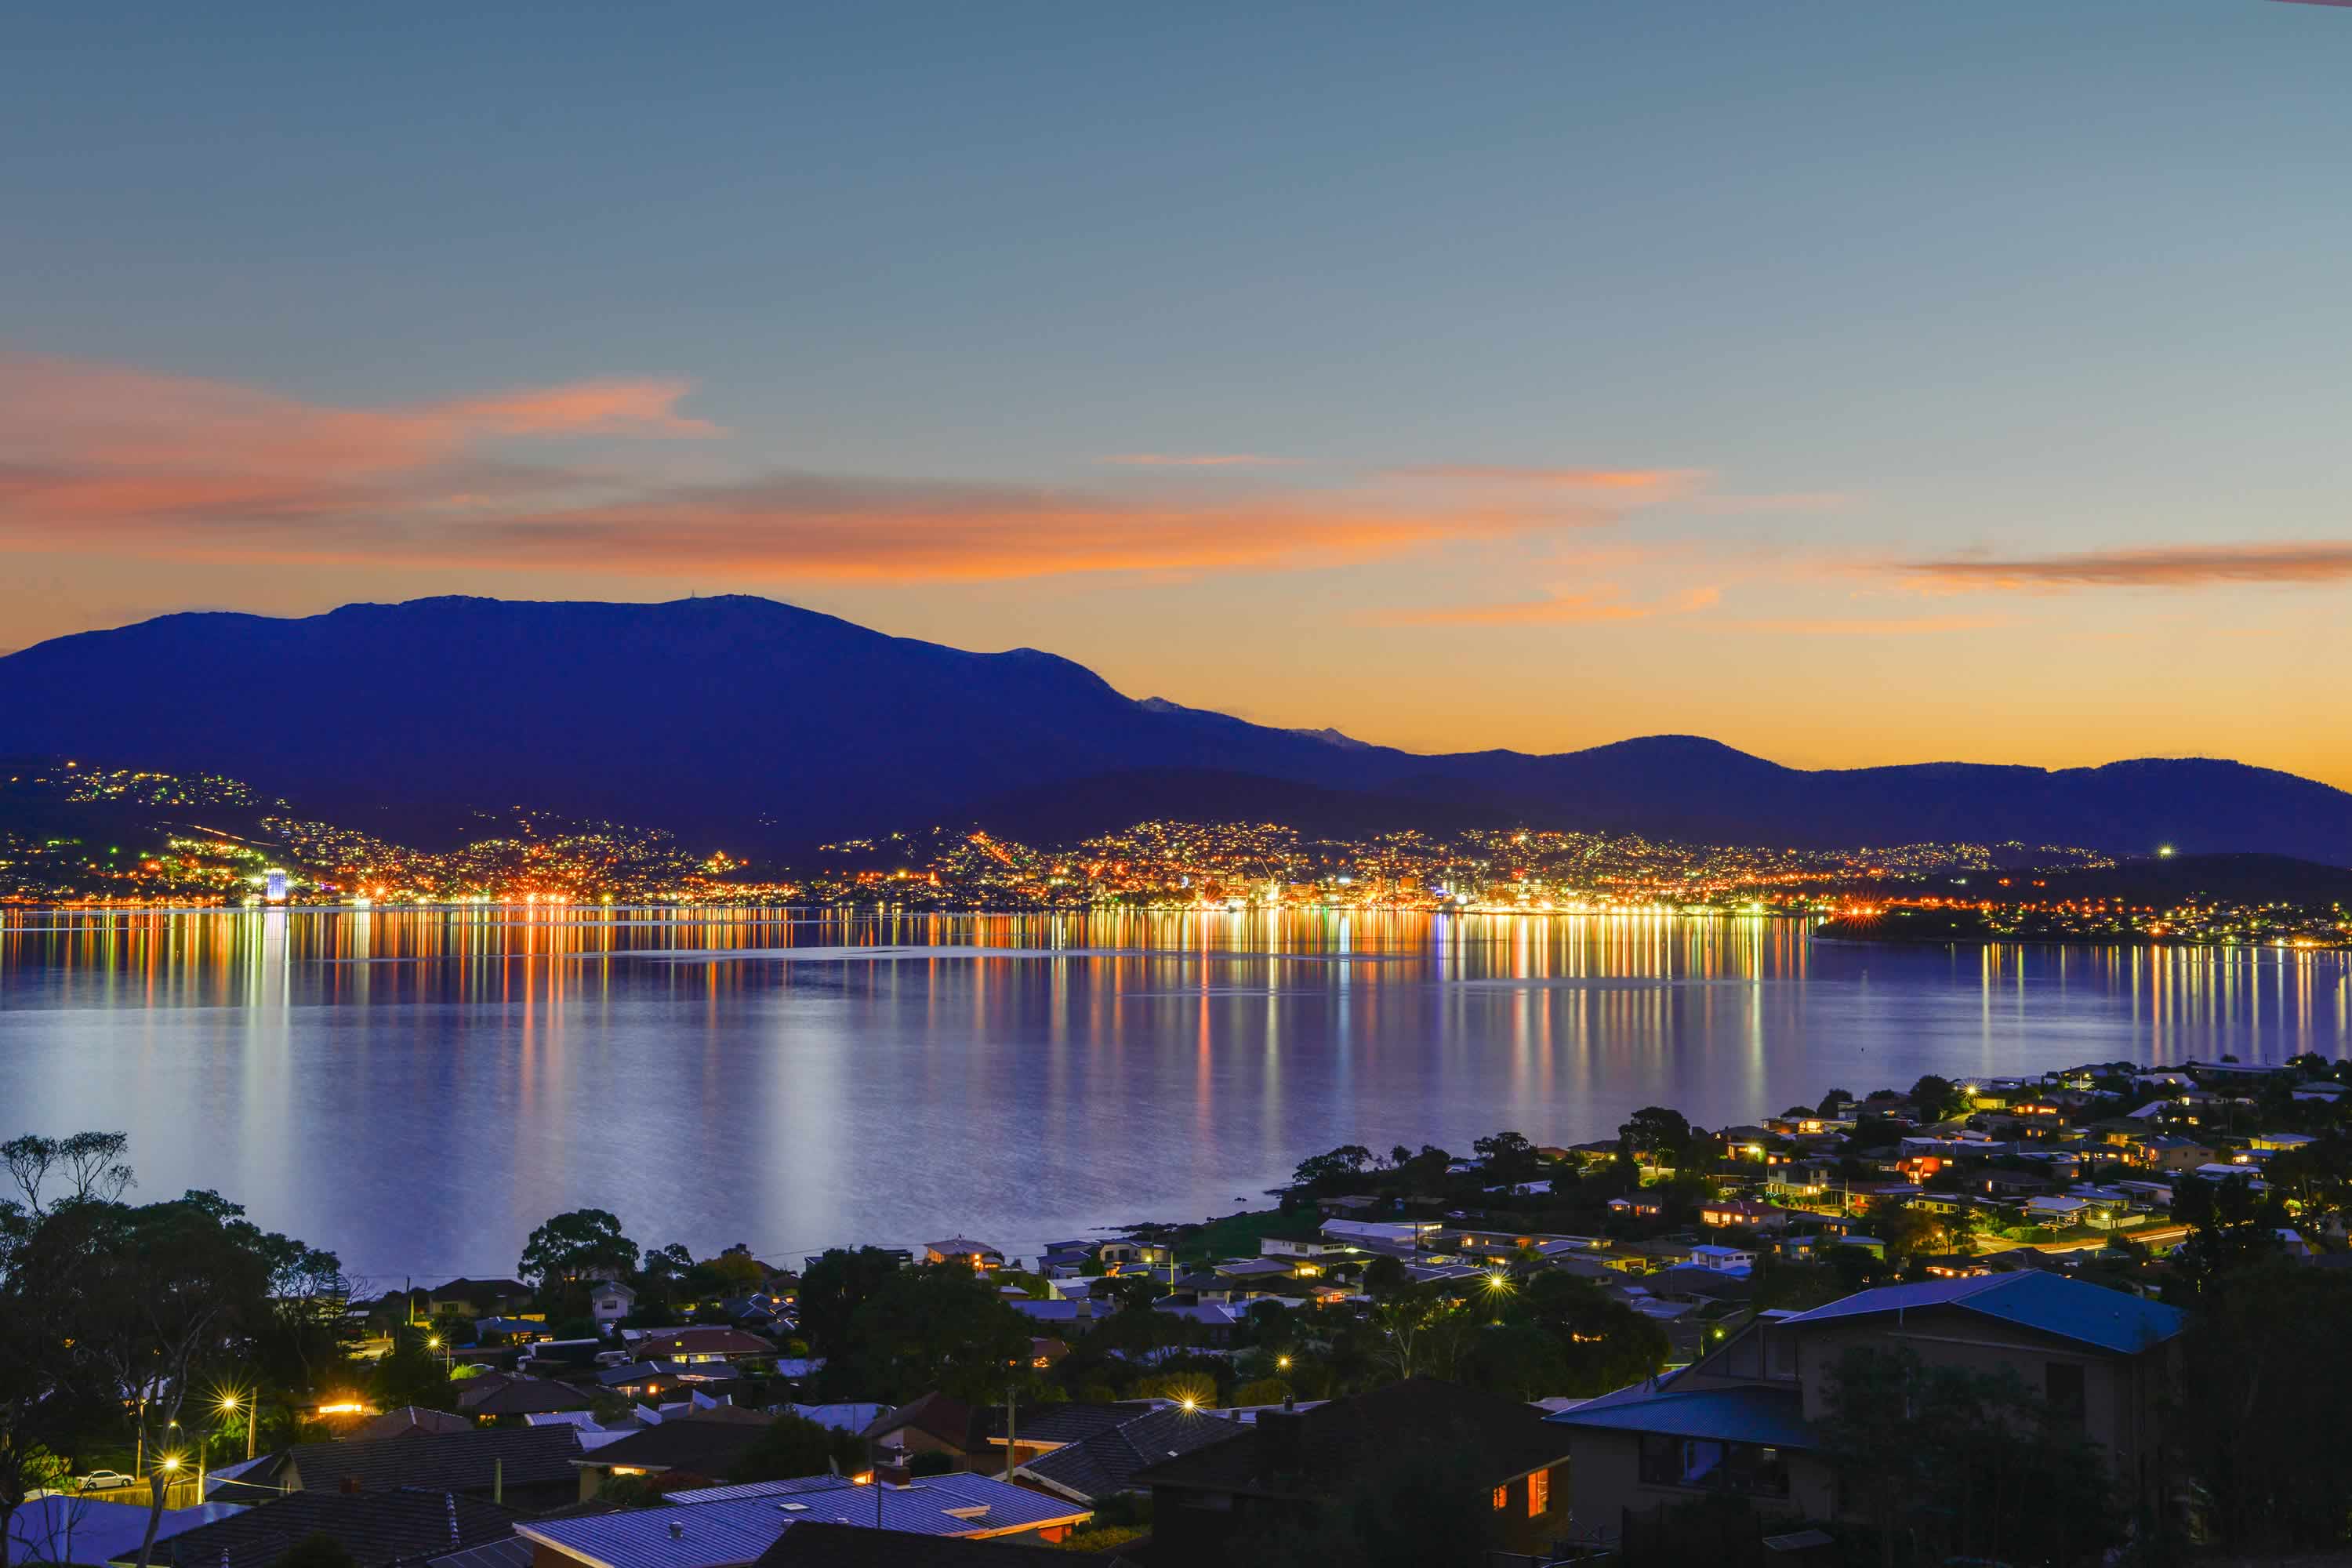 View looking across the River Derwent towards Hobart at night, with reflection of city lights on the water. Photo: Owen Fielding.